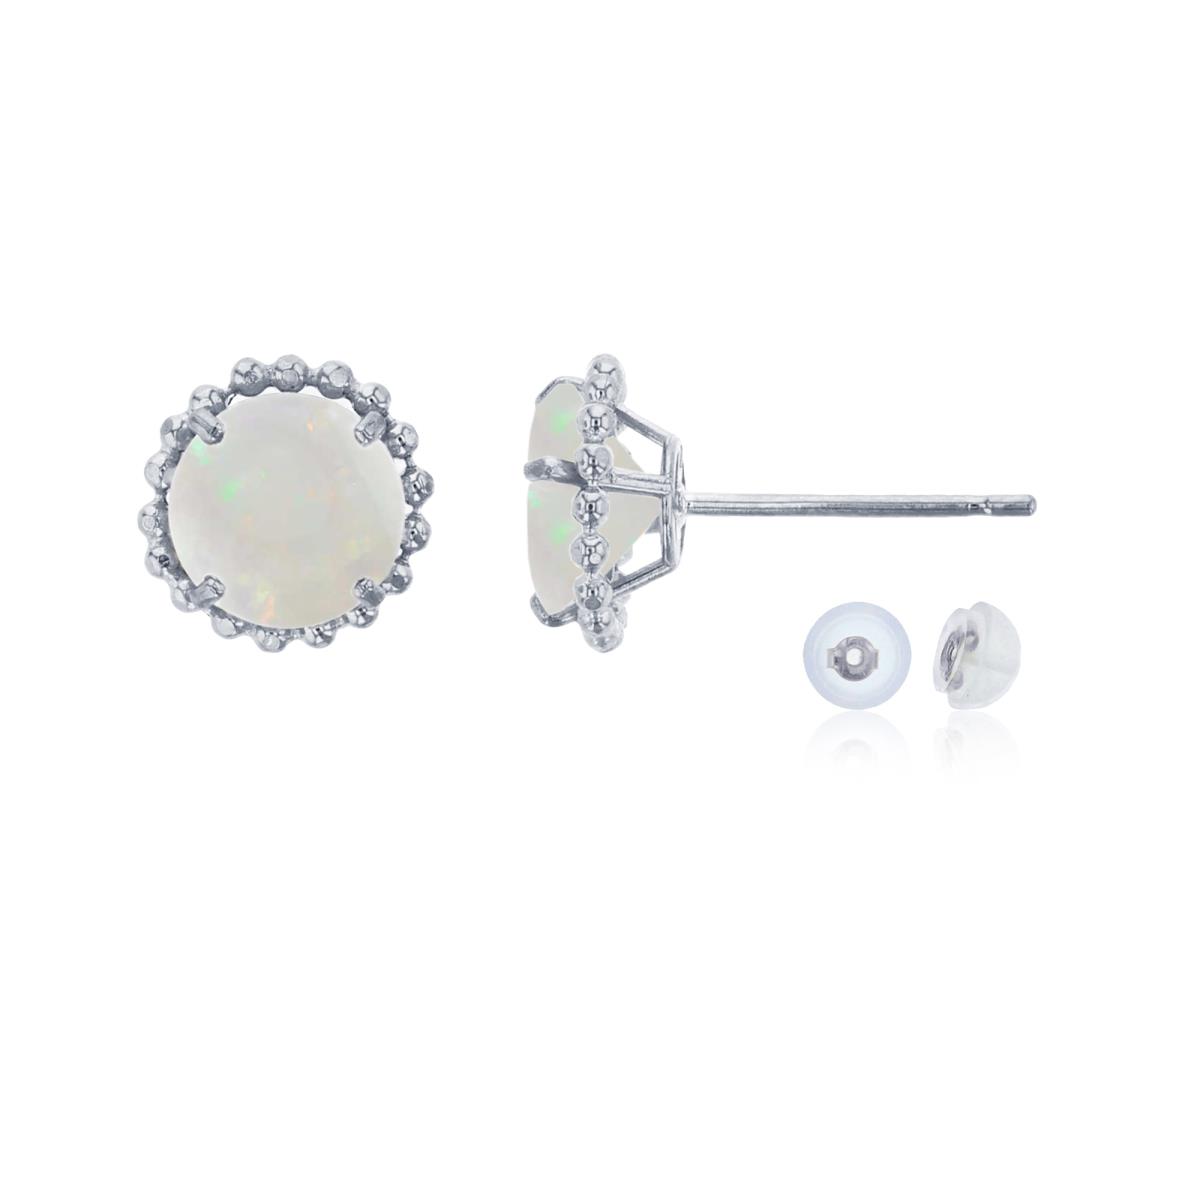 10K White Gold 5mm Rd Opal with Bead Frame Stud Earring with Silicone Back